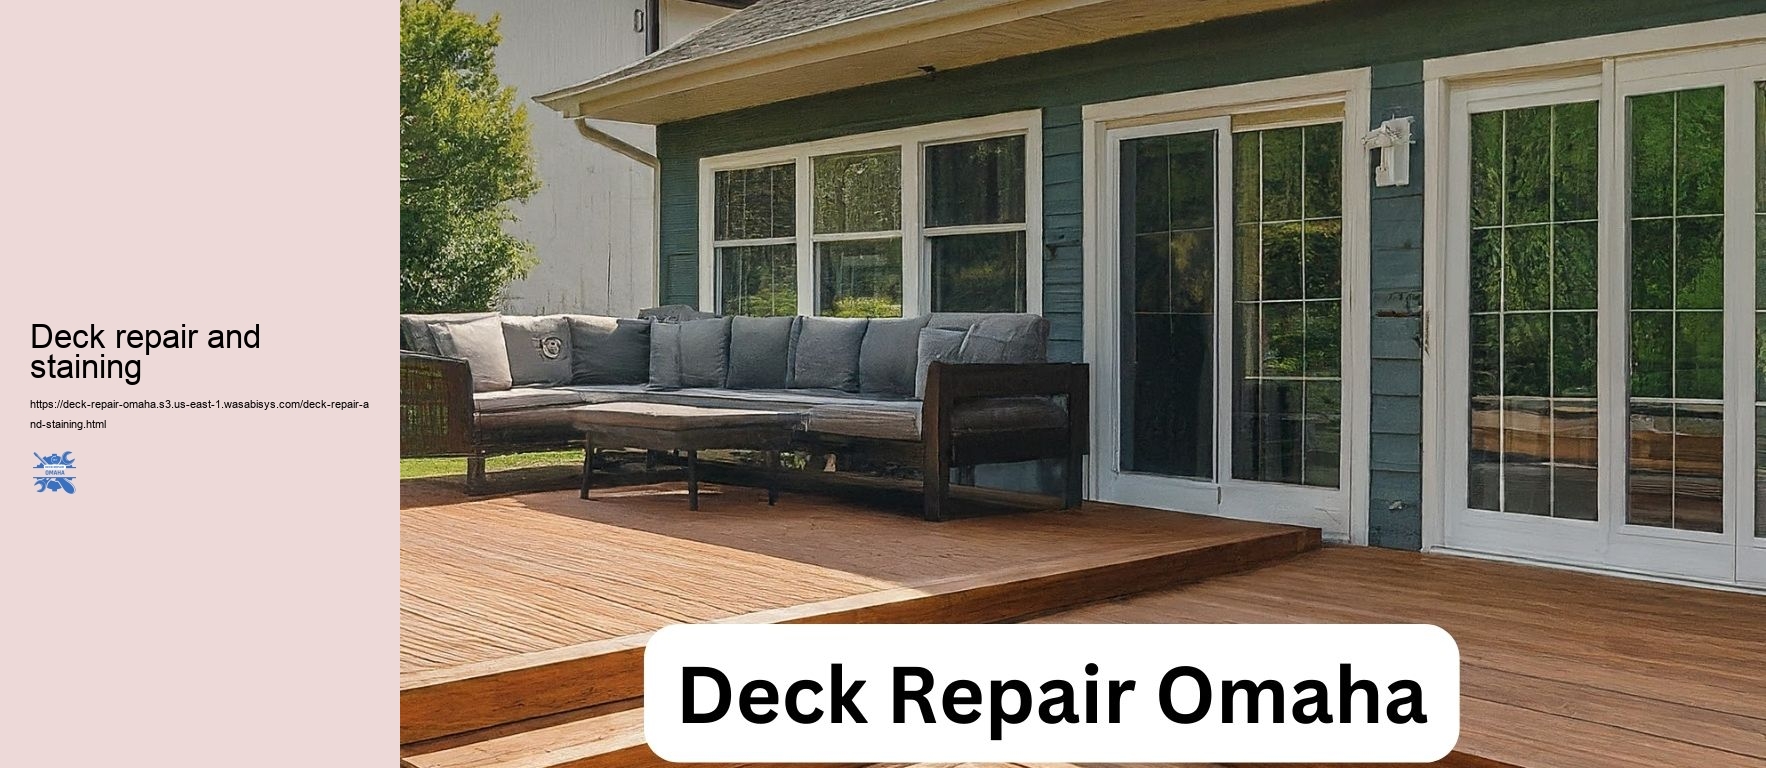 Deck repair and staining